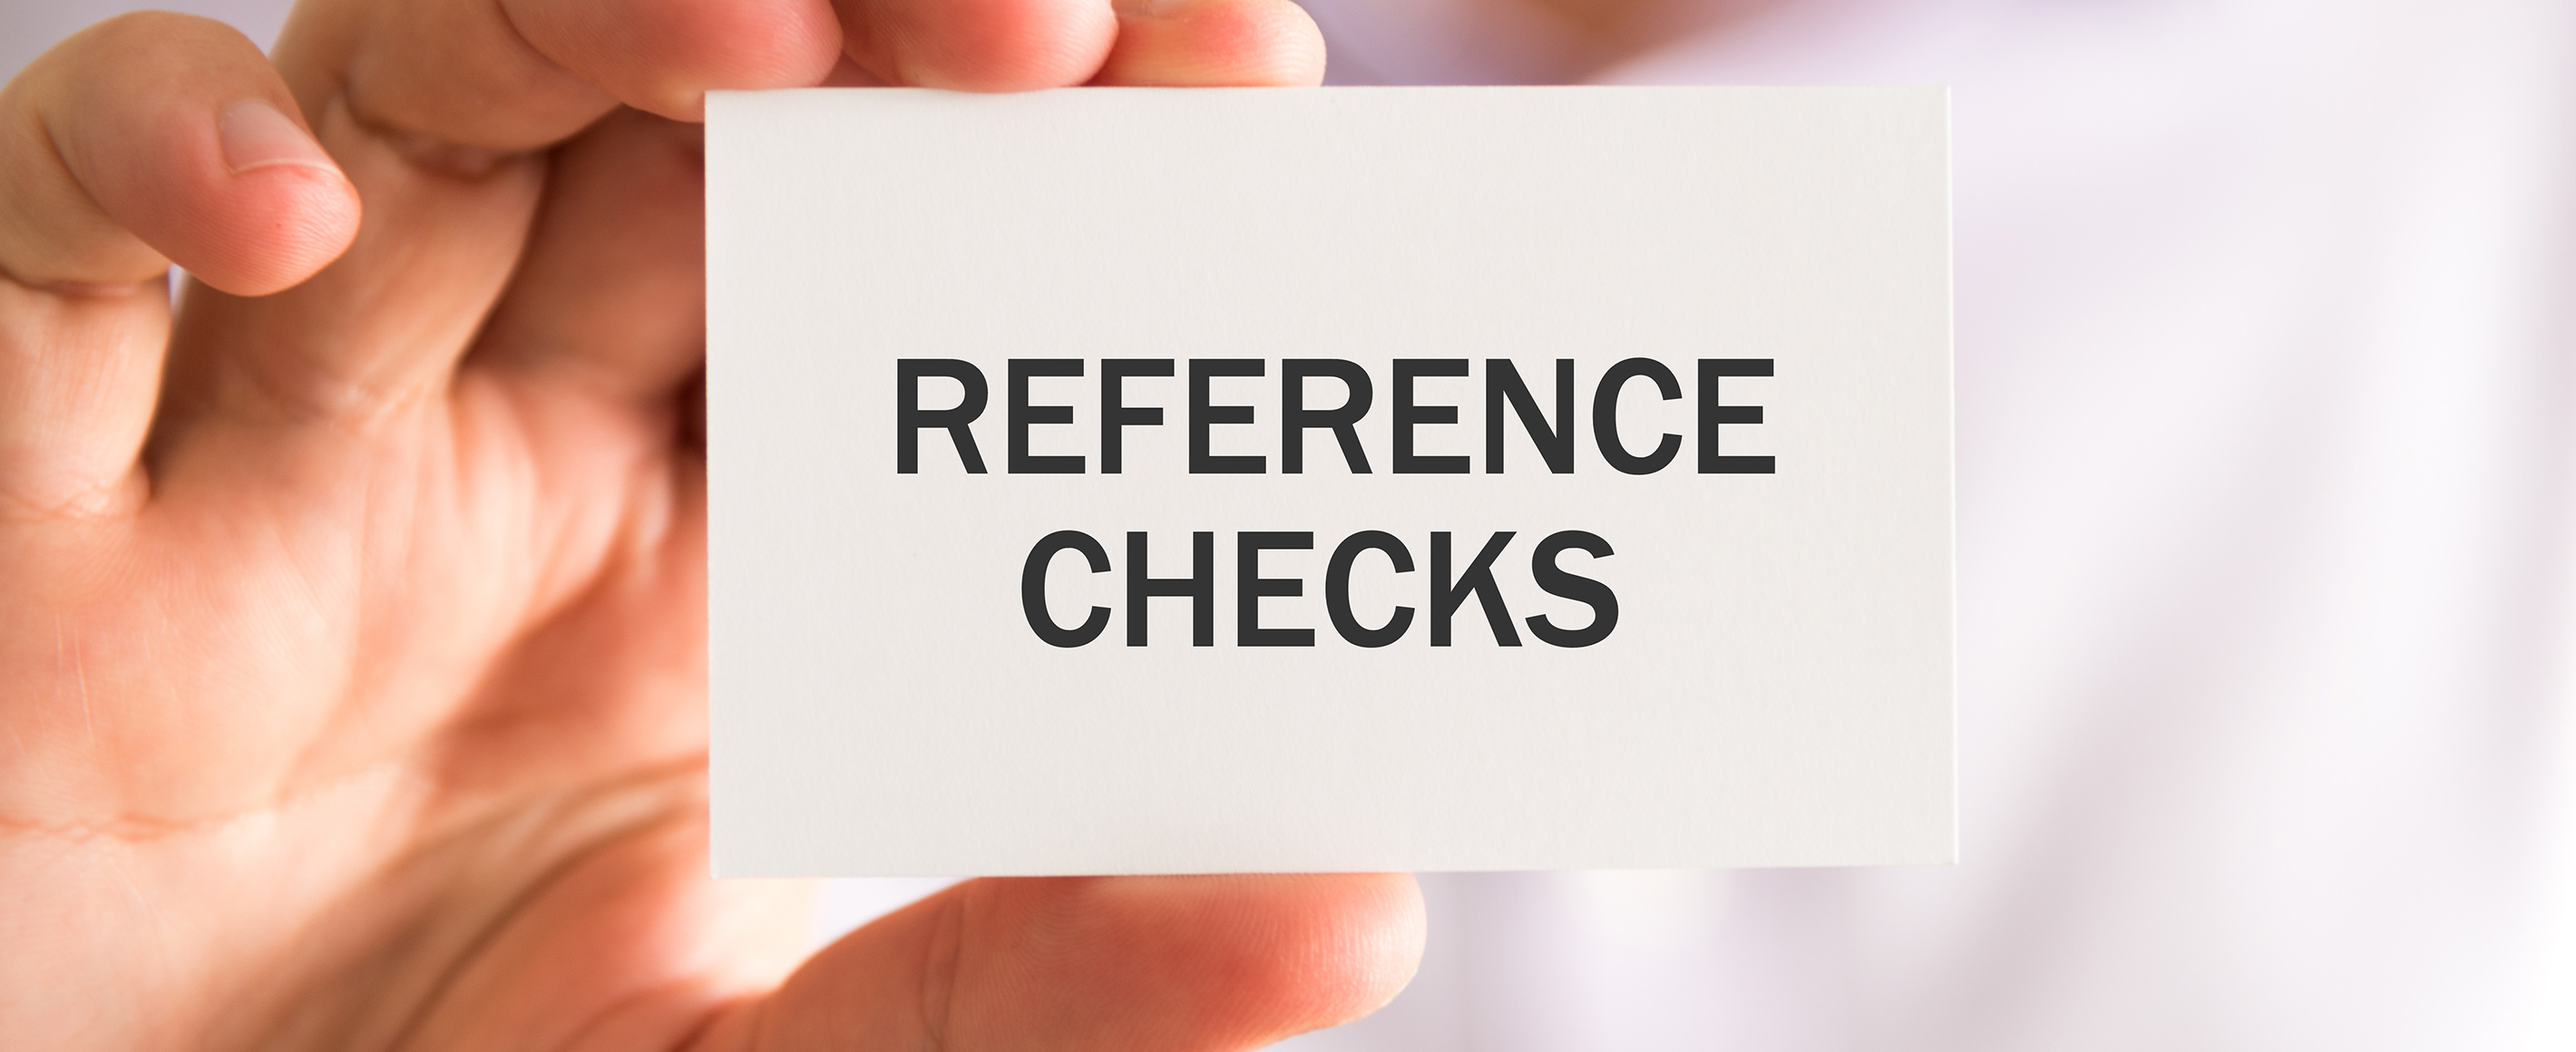 How to complete reference checks in international education